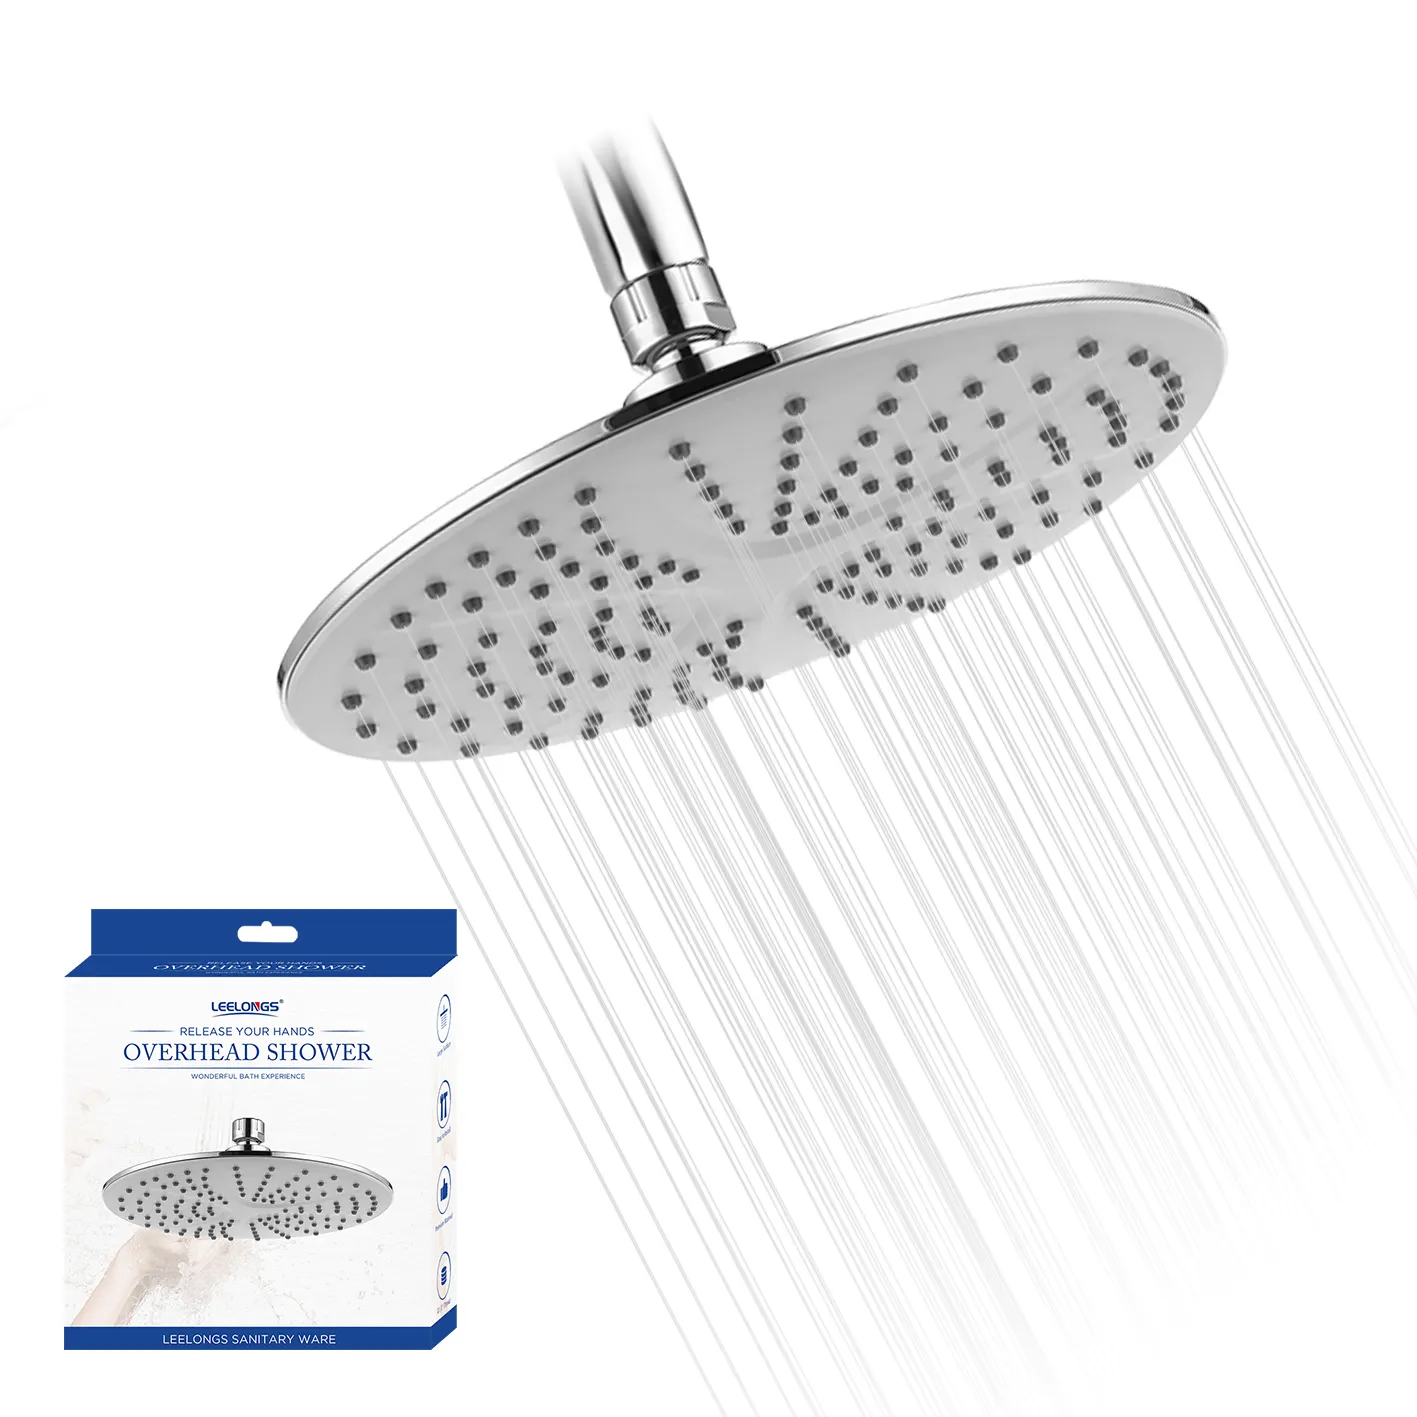 Leelongs Factory 23cm 9 inches ABS Chromed Top Shower Head with Shower Arm Brass Swivel Ball for EU Market